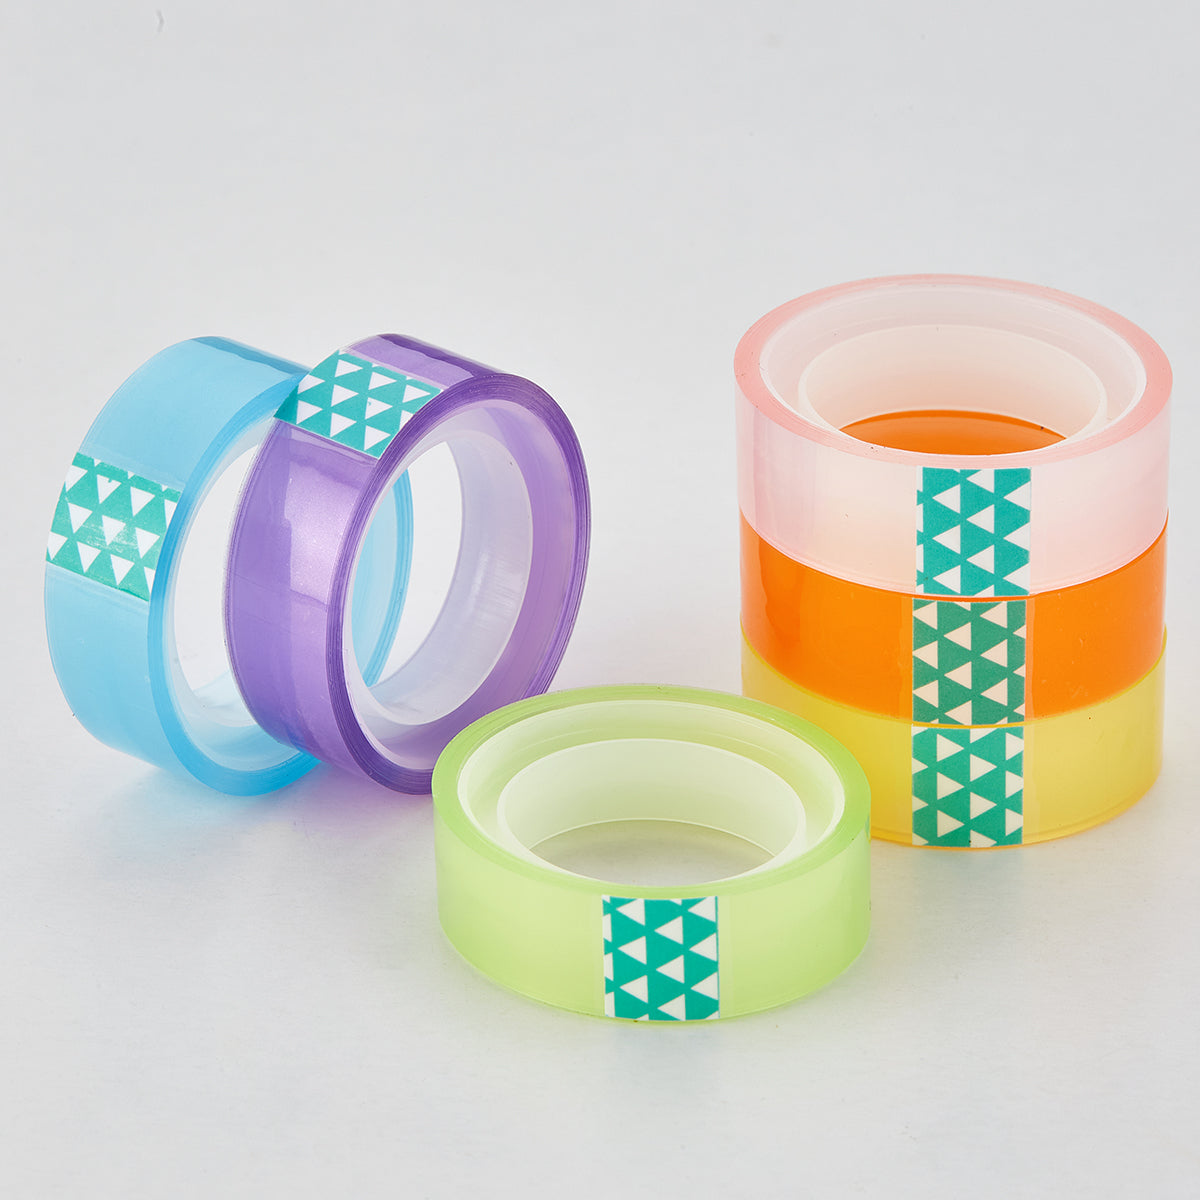 5-Piece Stationery Color Tape